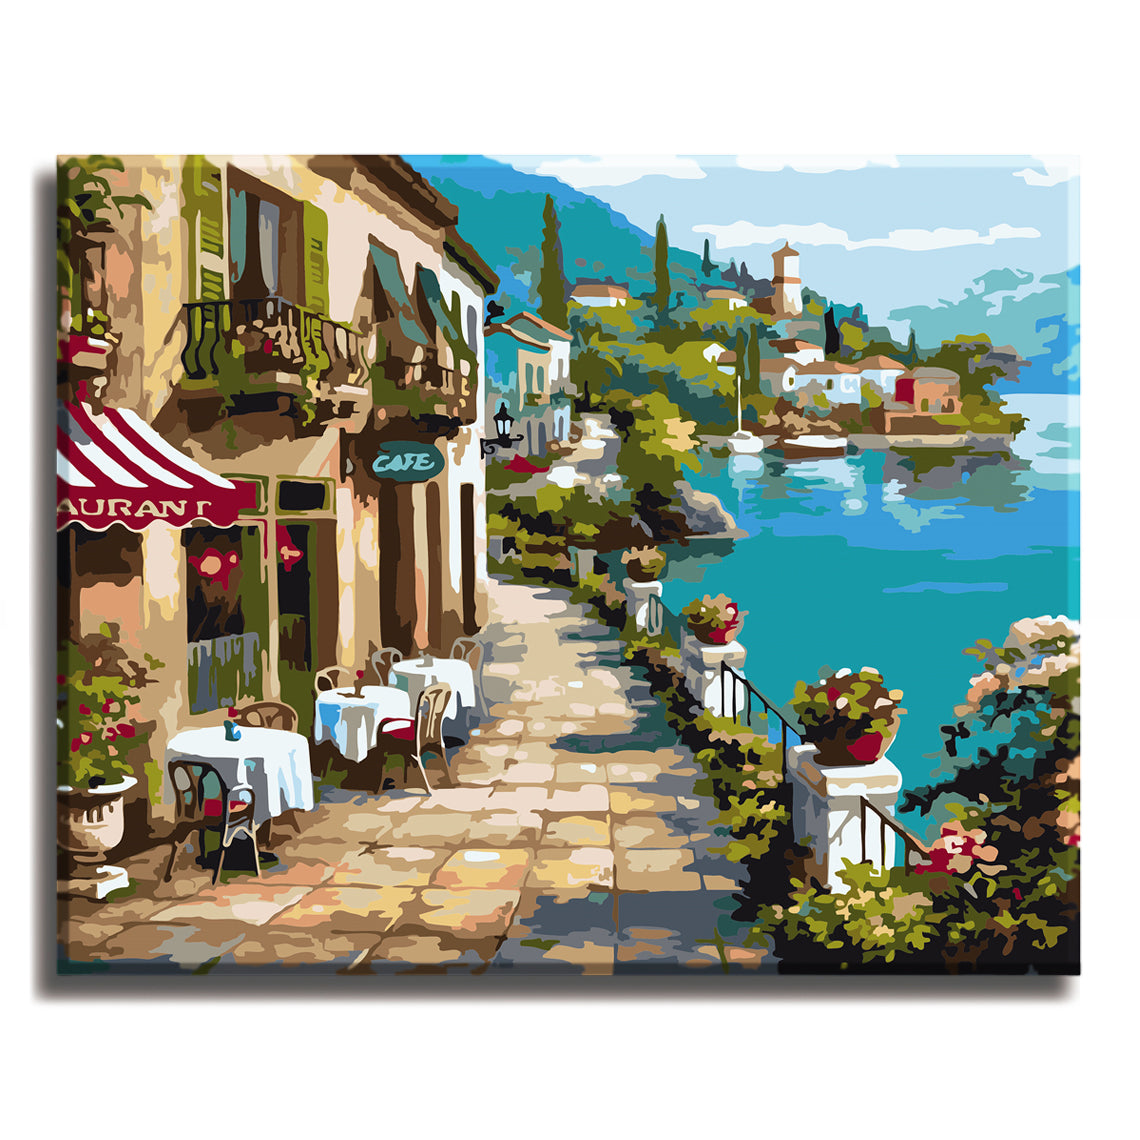 The First Vacation - Paint by Numbers Kit for Adults DIY Oil Painting Kit  on Canvas